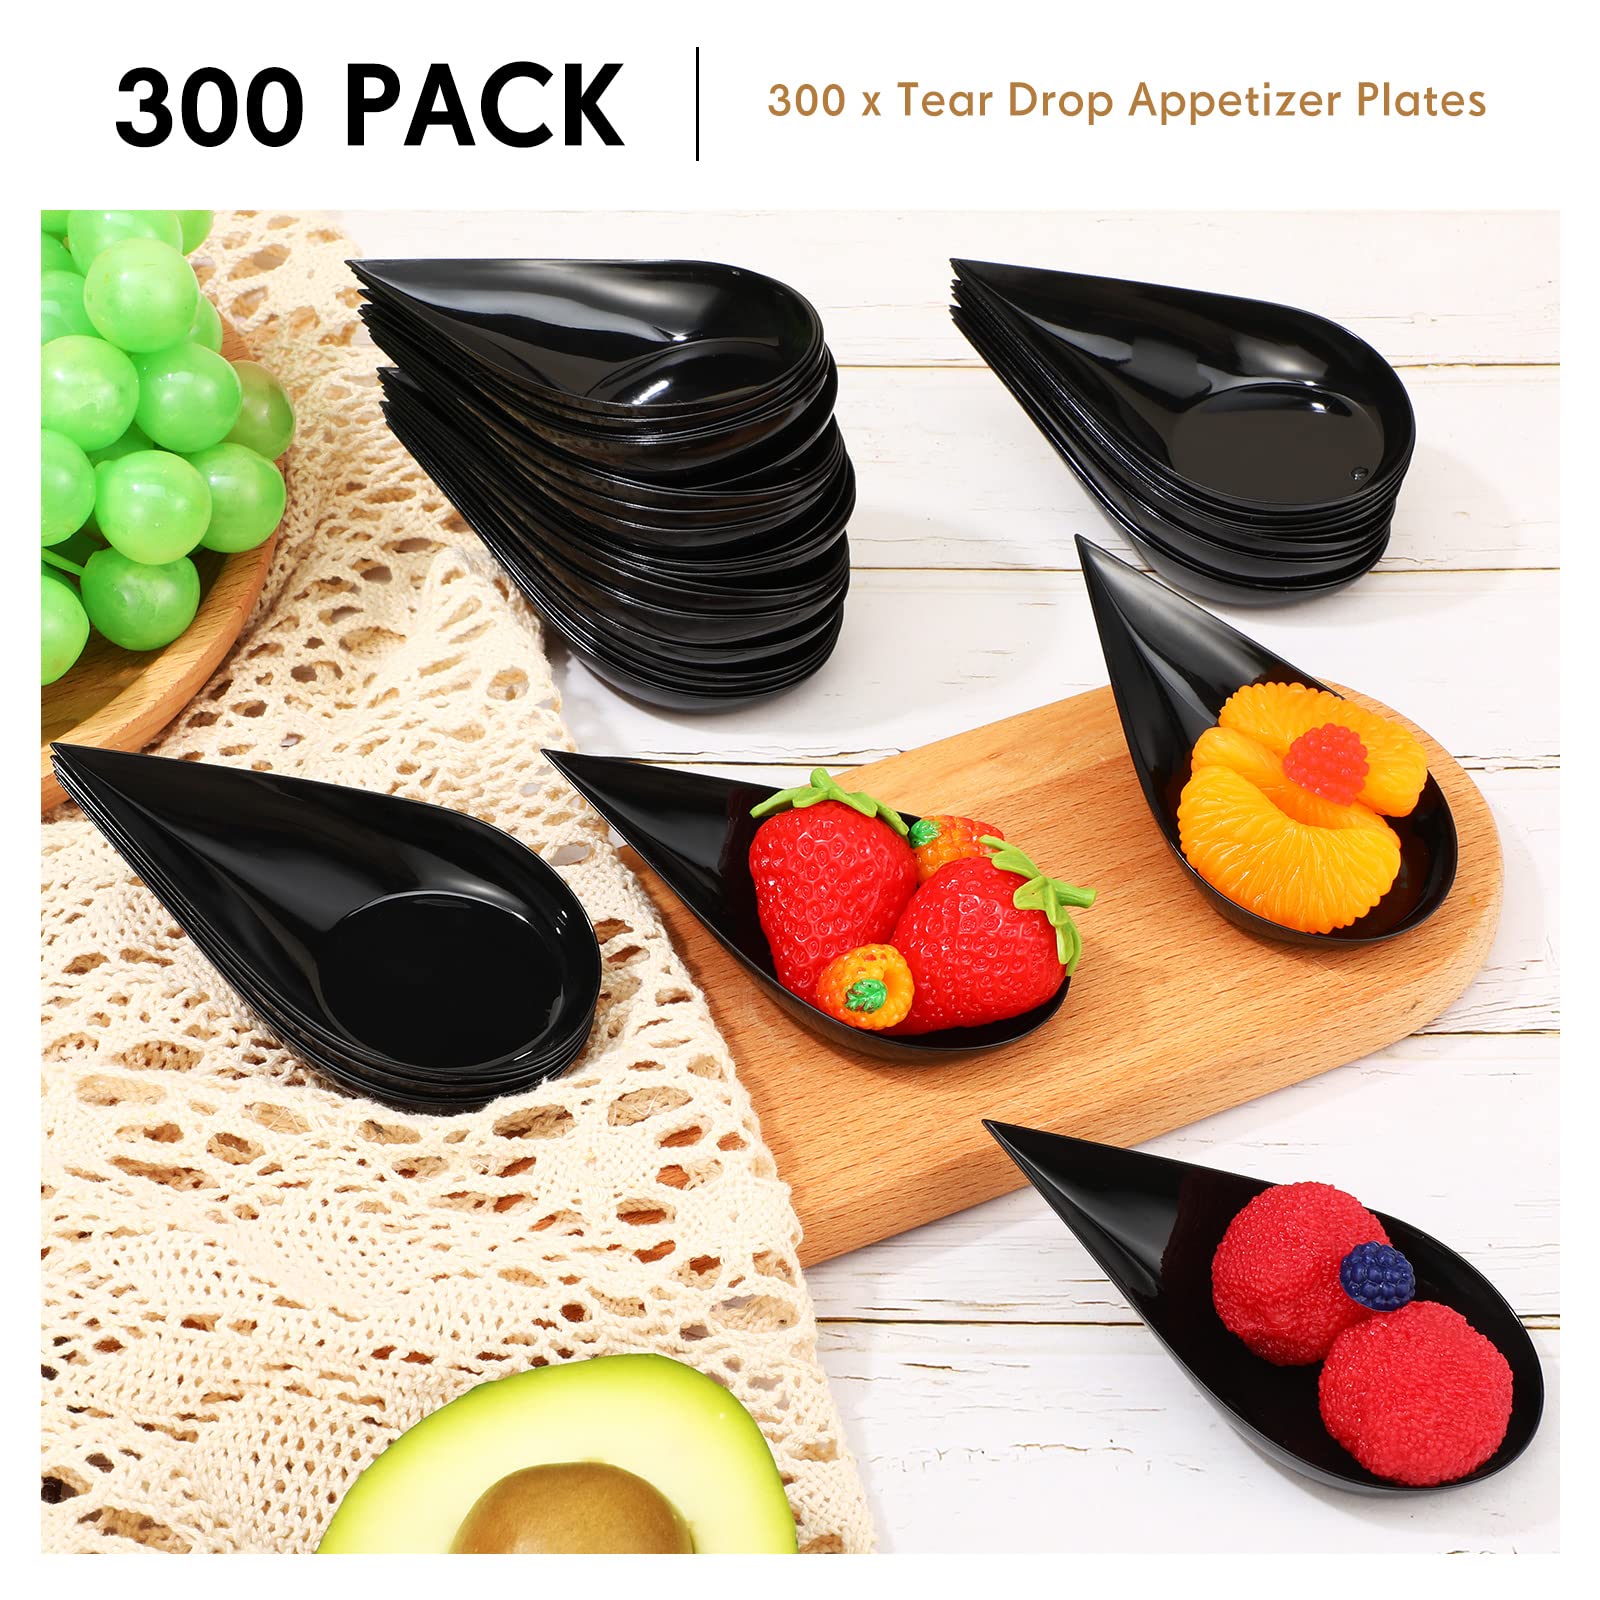 300 Pcs 4 Inch Tear Drop Mini Appetizer Plates Plastic Spoons Catering Supplies Small Mini Spoons Tasting Spoons Appetizer Dishes Mini Dessert Bowls Dessert Spoons Disposable Spoons for Party (Black)